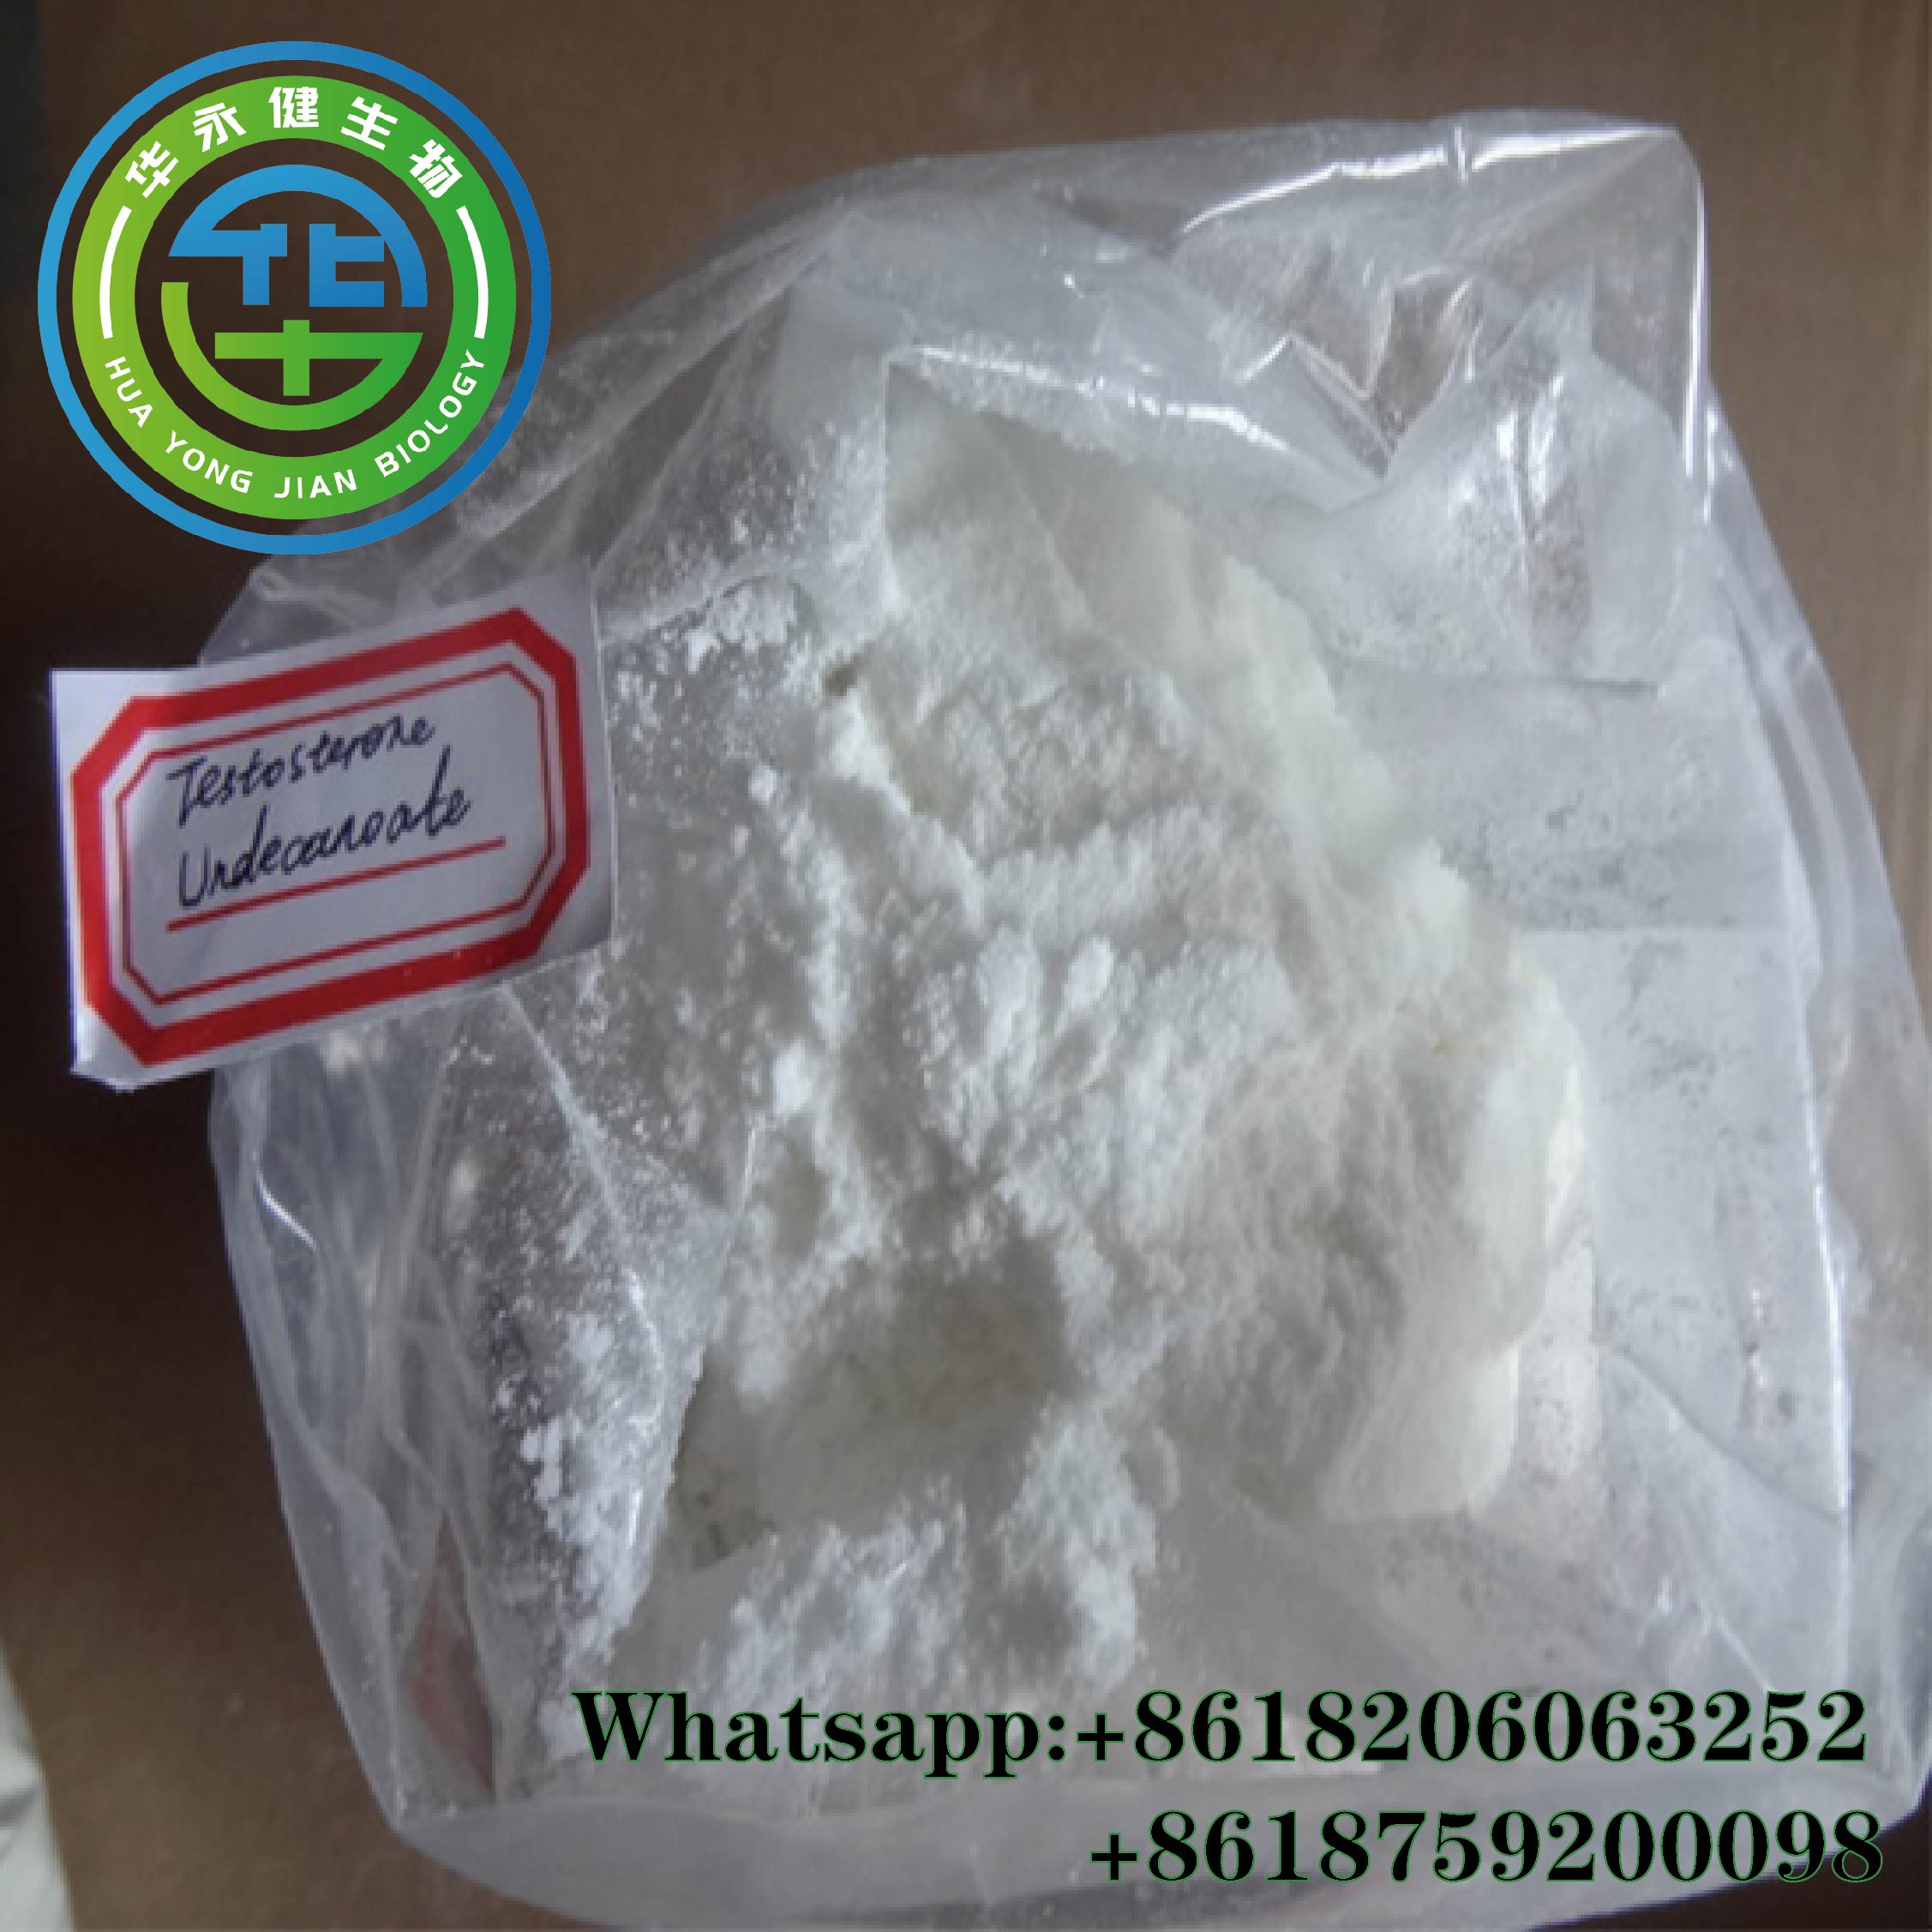  Test U 99% Purity Testosterone Undecanoate Steroid Raw Material Powder for Enhancing Strength Bodybuilding 